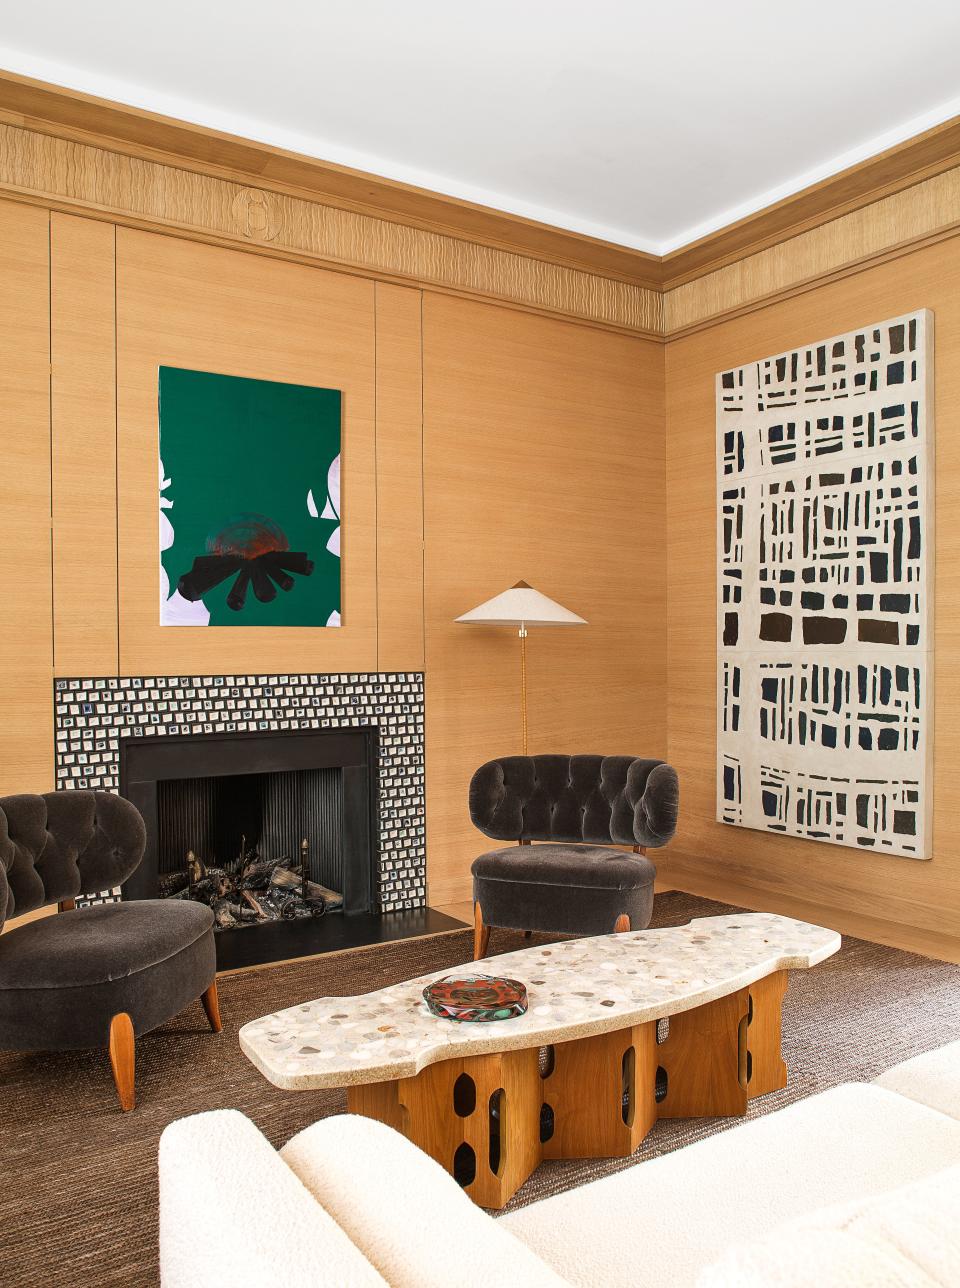 Otto Schulz chairs flank a ceramic mantelpiece by Armelle Benoit in the small living room. Paavo Tynell floor lamp; Harvey Probber table. On oak-paneled walls, art by Wilhelm Sasnal (left) and Valentin Carron.